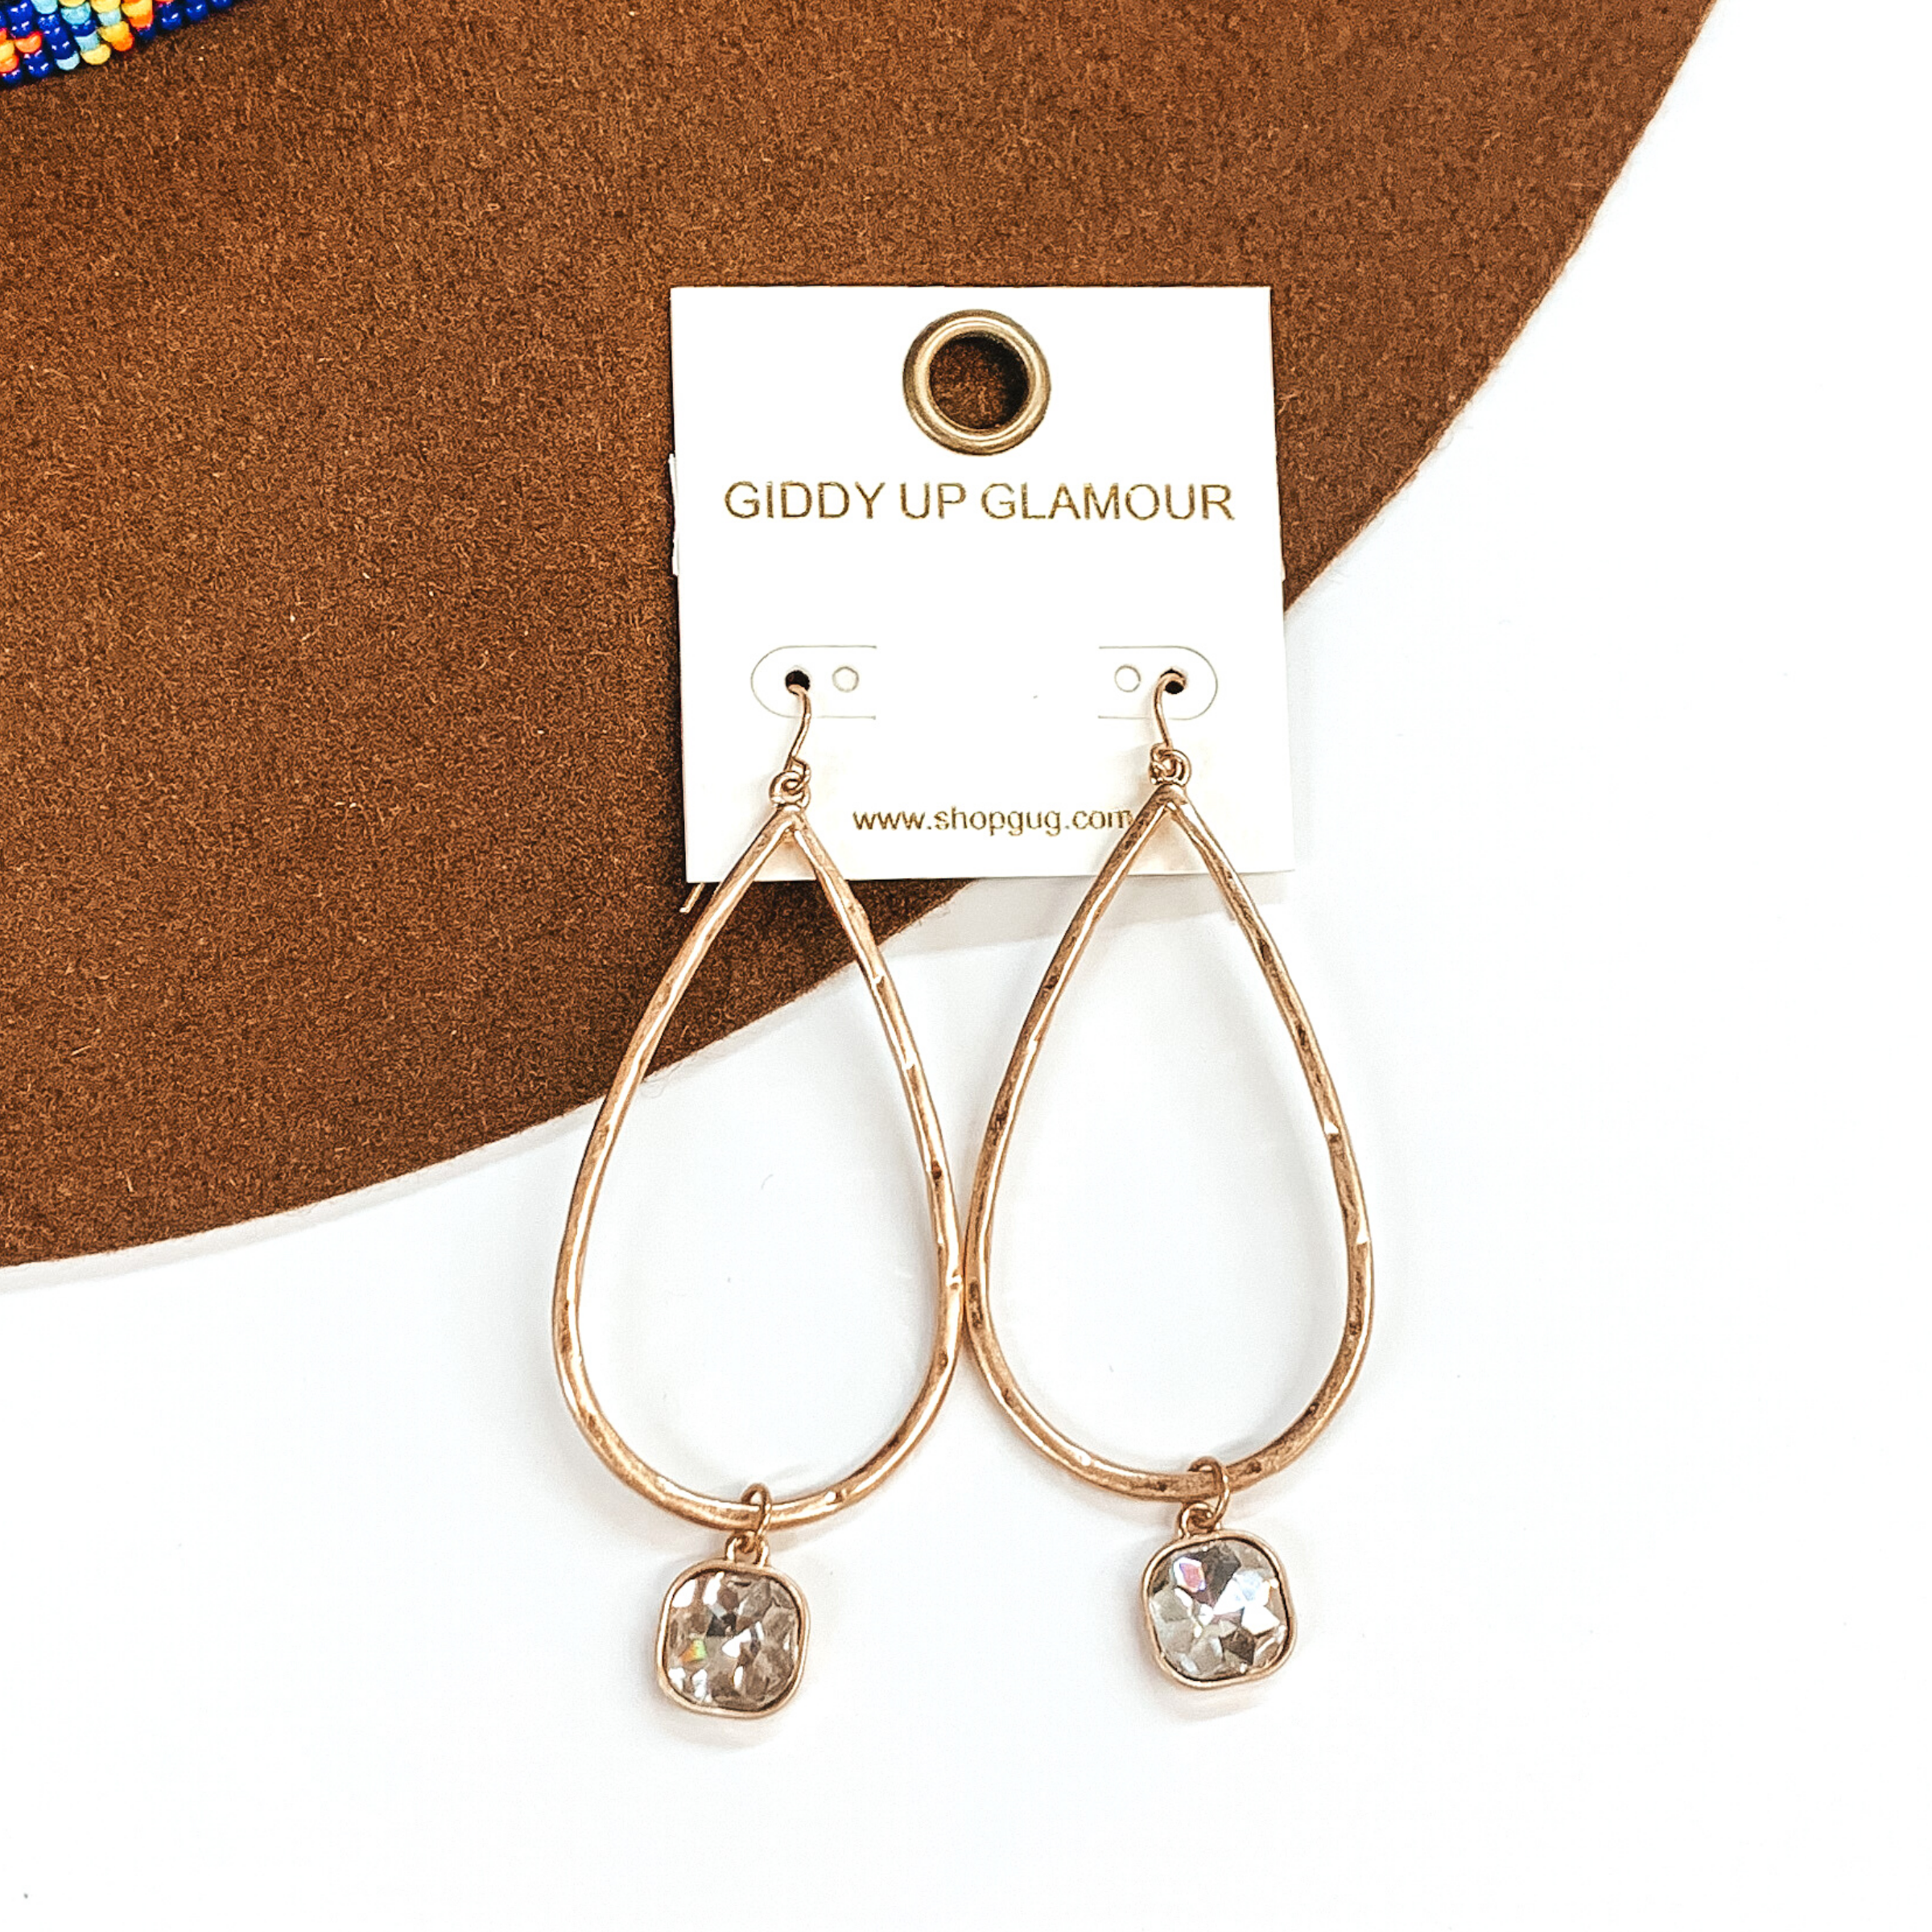 Gold teardrop hammered earrings with a hanging cushion cut clear crystal. These earrings are pictured on a white and brown background. 